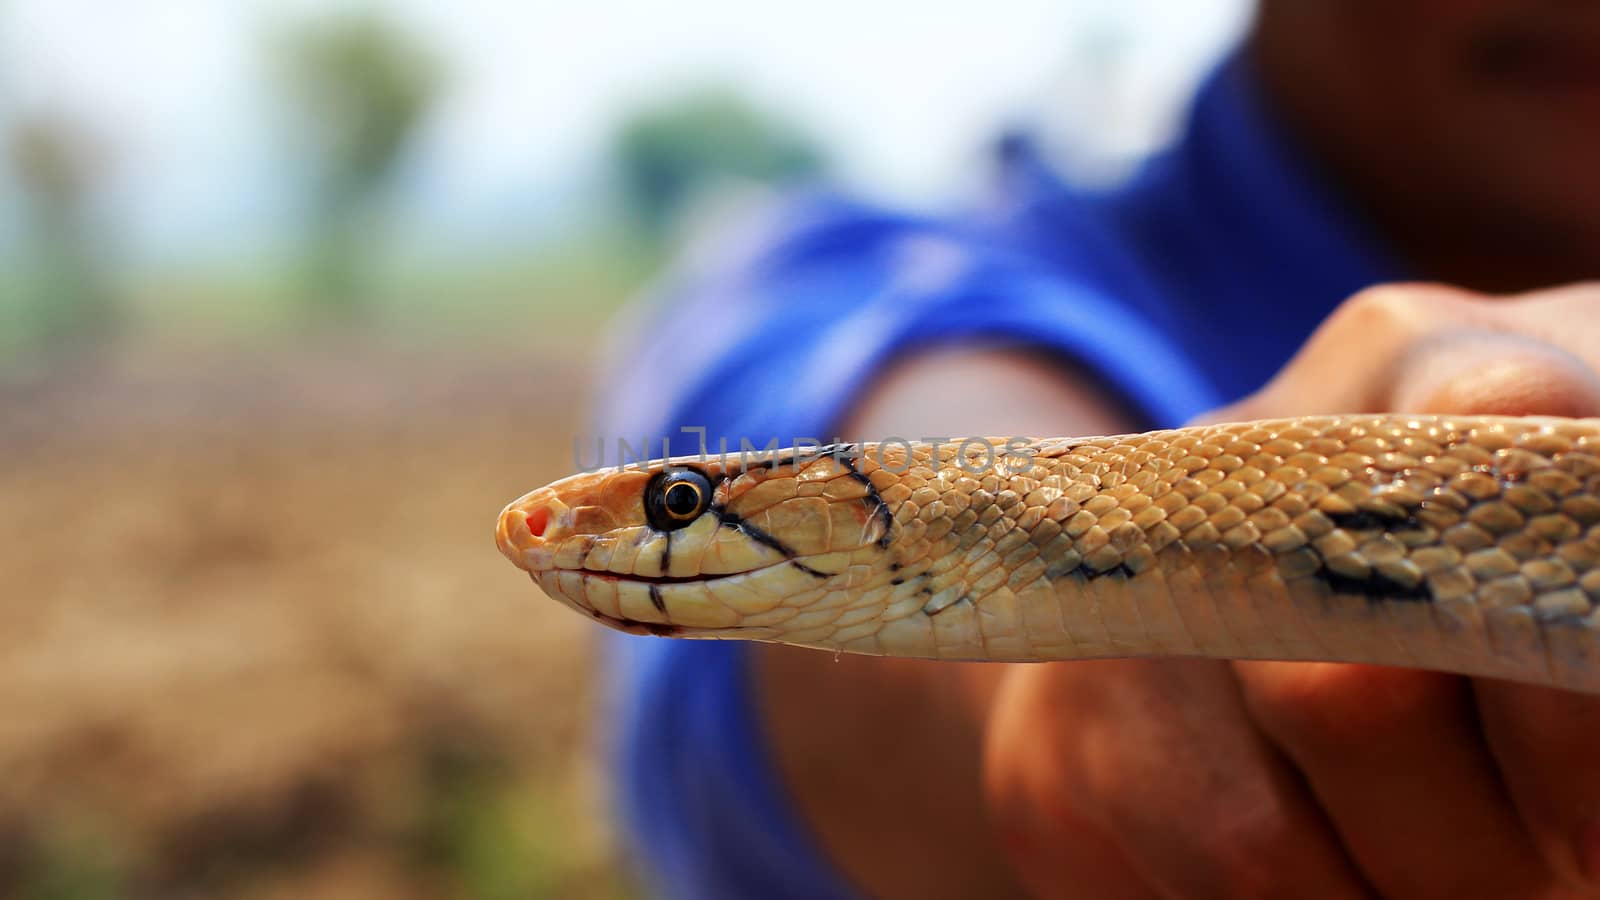 Indochinese rat snake by ibahoh